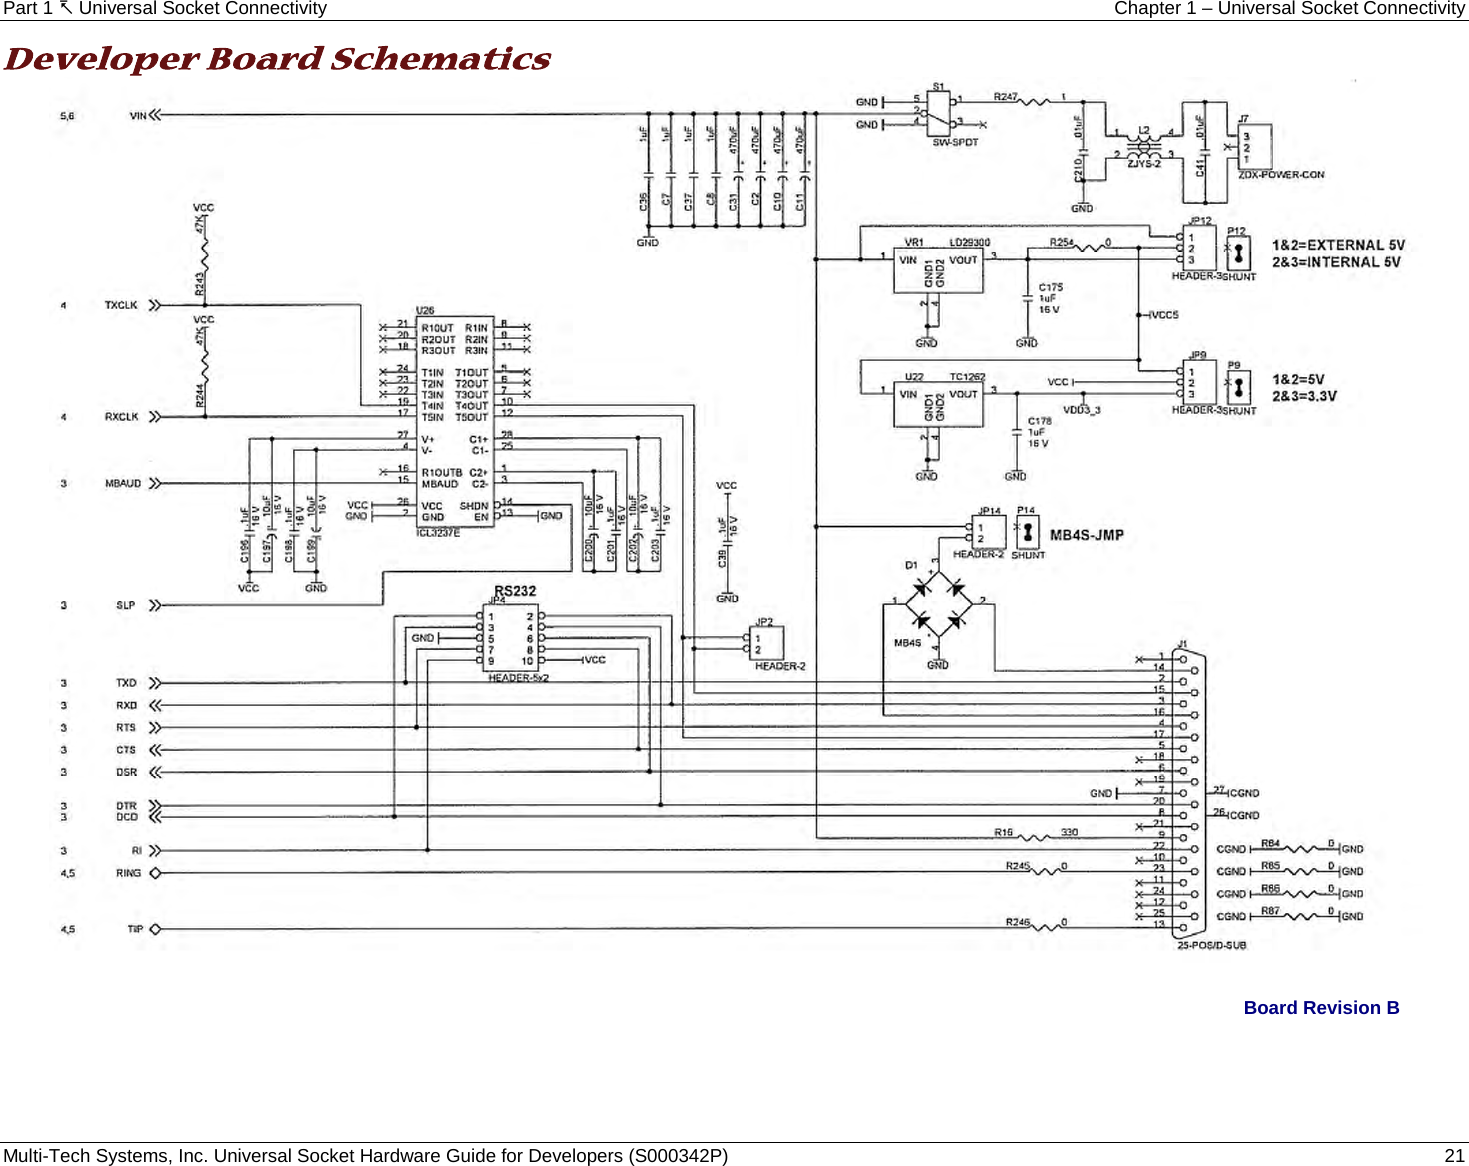 Part 1  Universal Socket Connectivity Chapter 1 – Universal Socket Connectivity Multi-Tech Systems, Inc. Universal Socket Hardware Guide for Developers (S000342P)  21  Developer Board Schematics   Board Revision B     